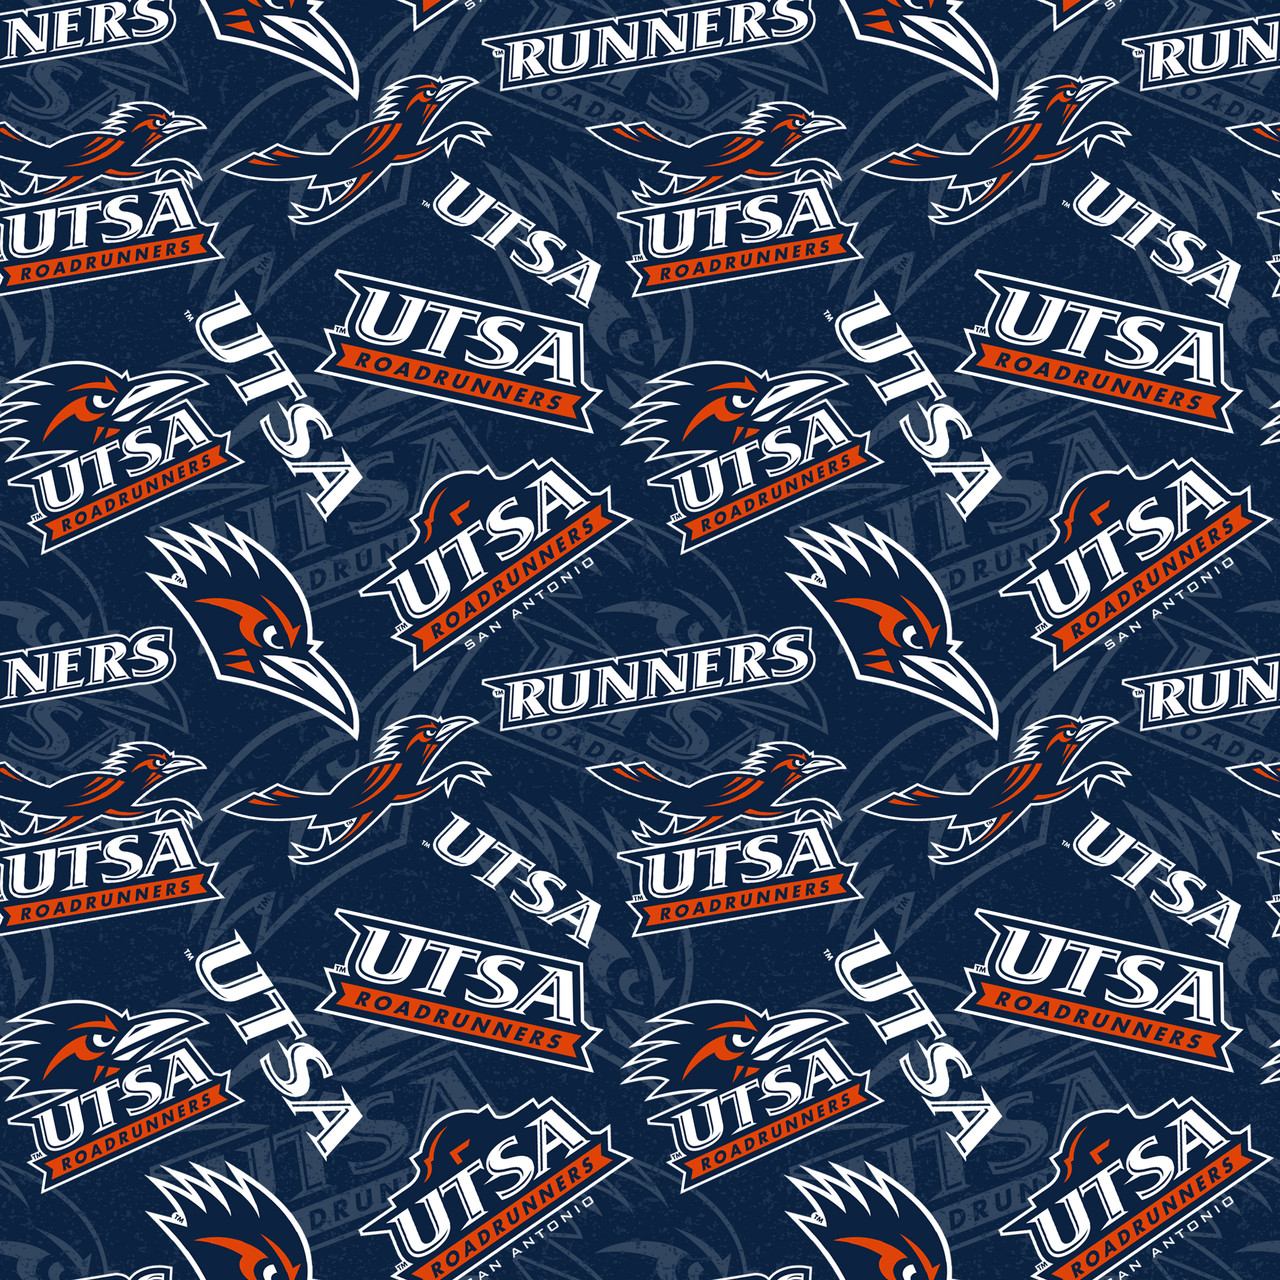 University of Texas at San Antonio Roadrunners Cotton Fabric with Tone On Tone Print or Matching Solid Cotton Fabrics